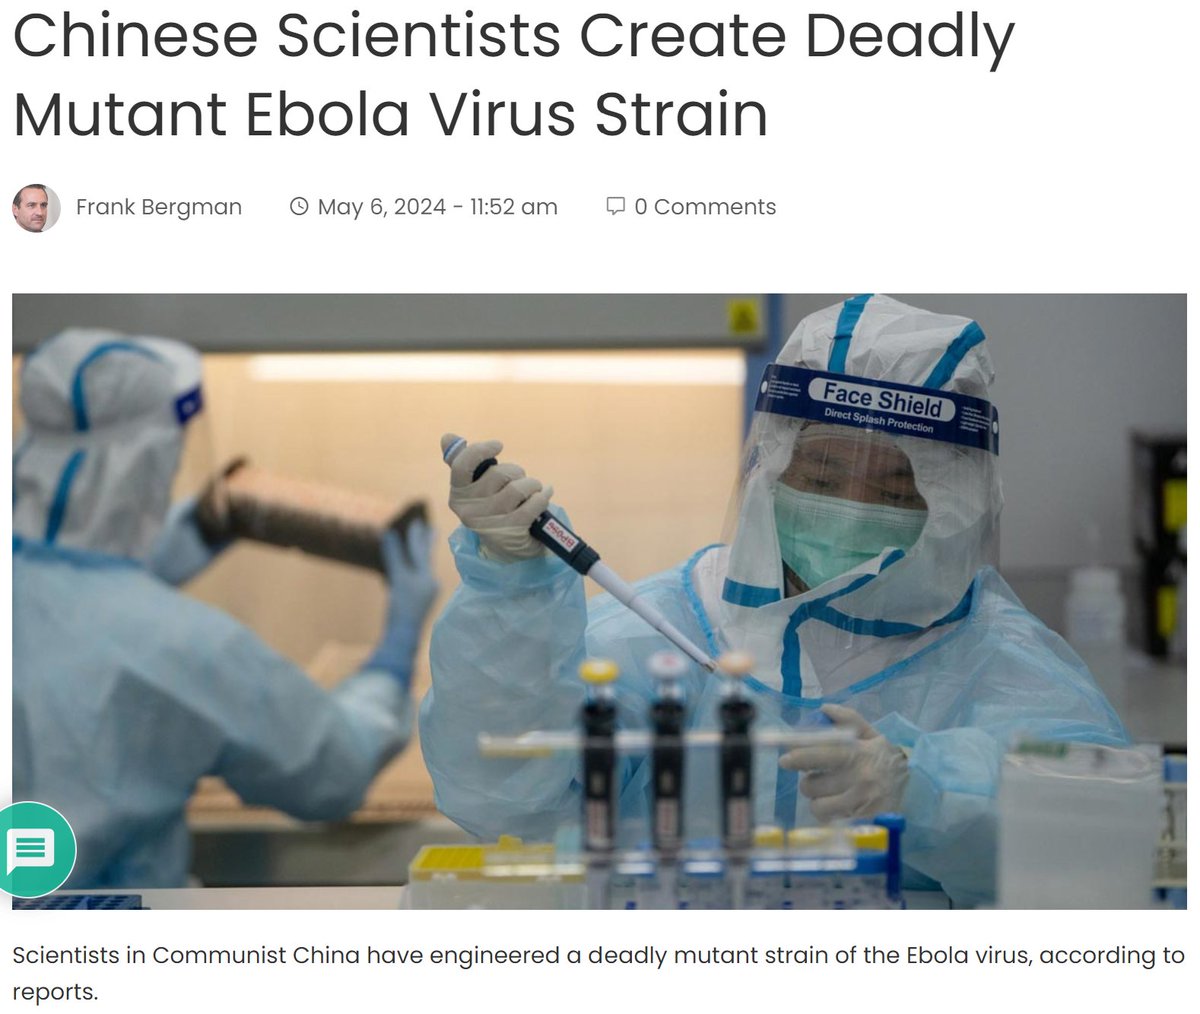 Scientists in Communist China have engineered a deadly mutant strain of the Ebola virus, according to reports.
The Chinese scientists revealed that lab tests of the new strain killed a group of hamsters. The mutant strain was developed by a team of researchers at Hebei Medical